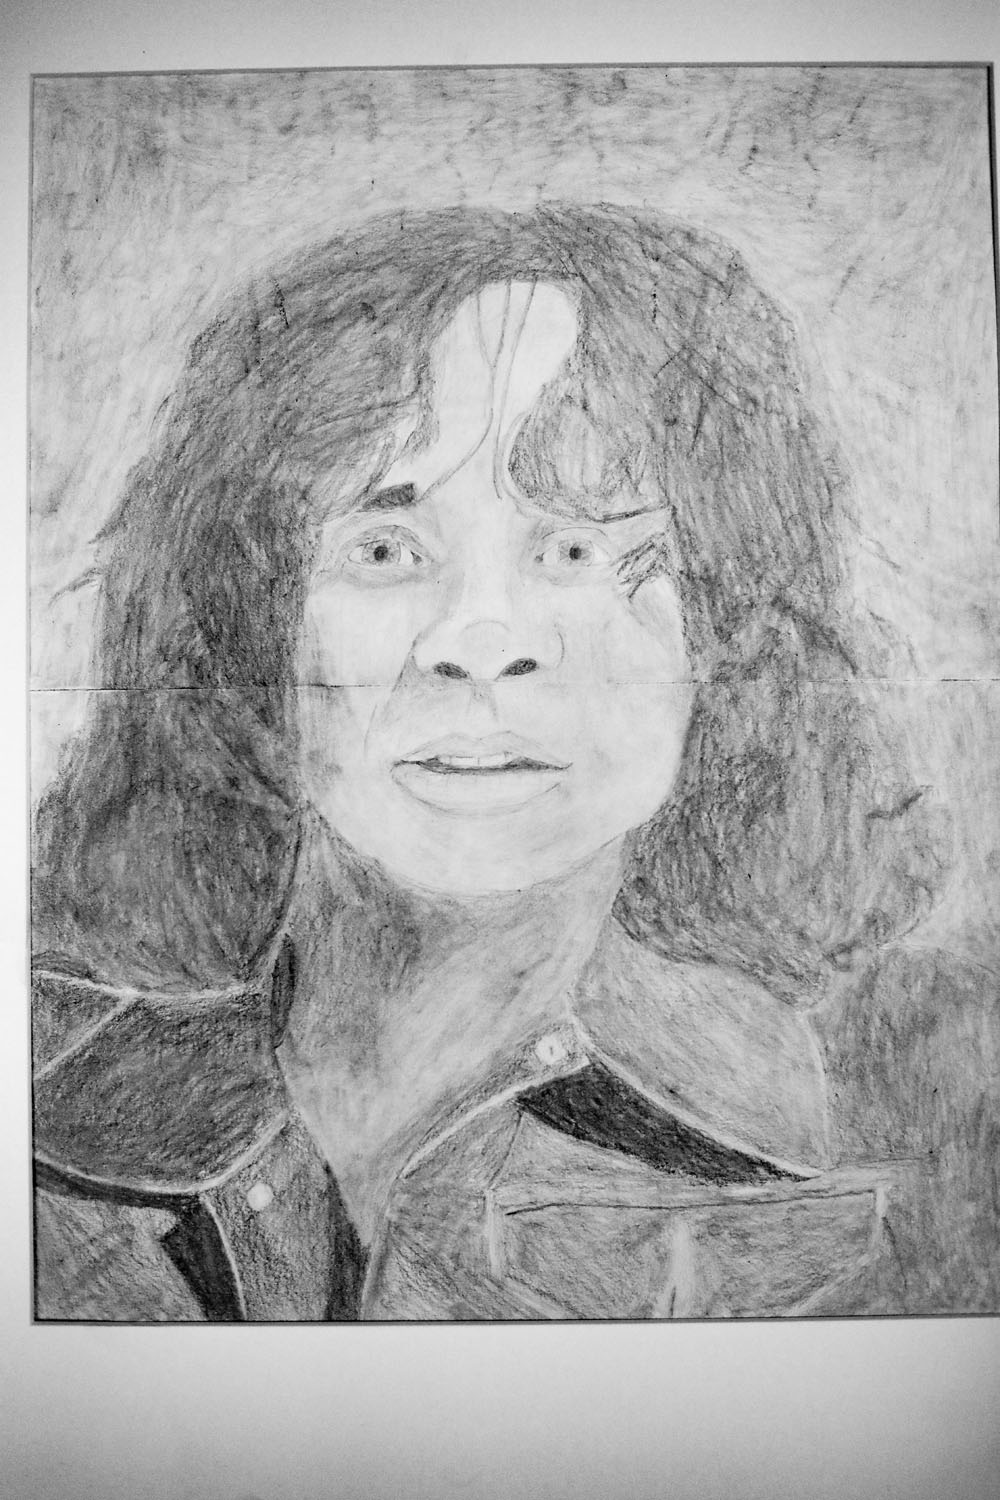 Pencil drawing of man with long hair